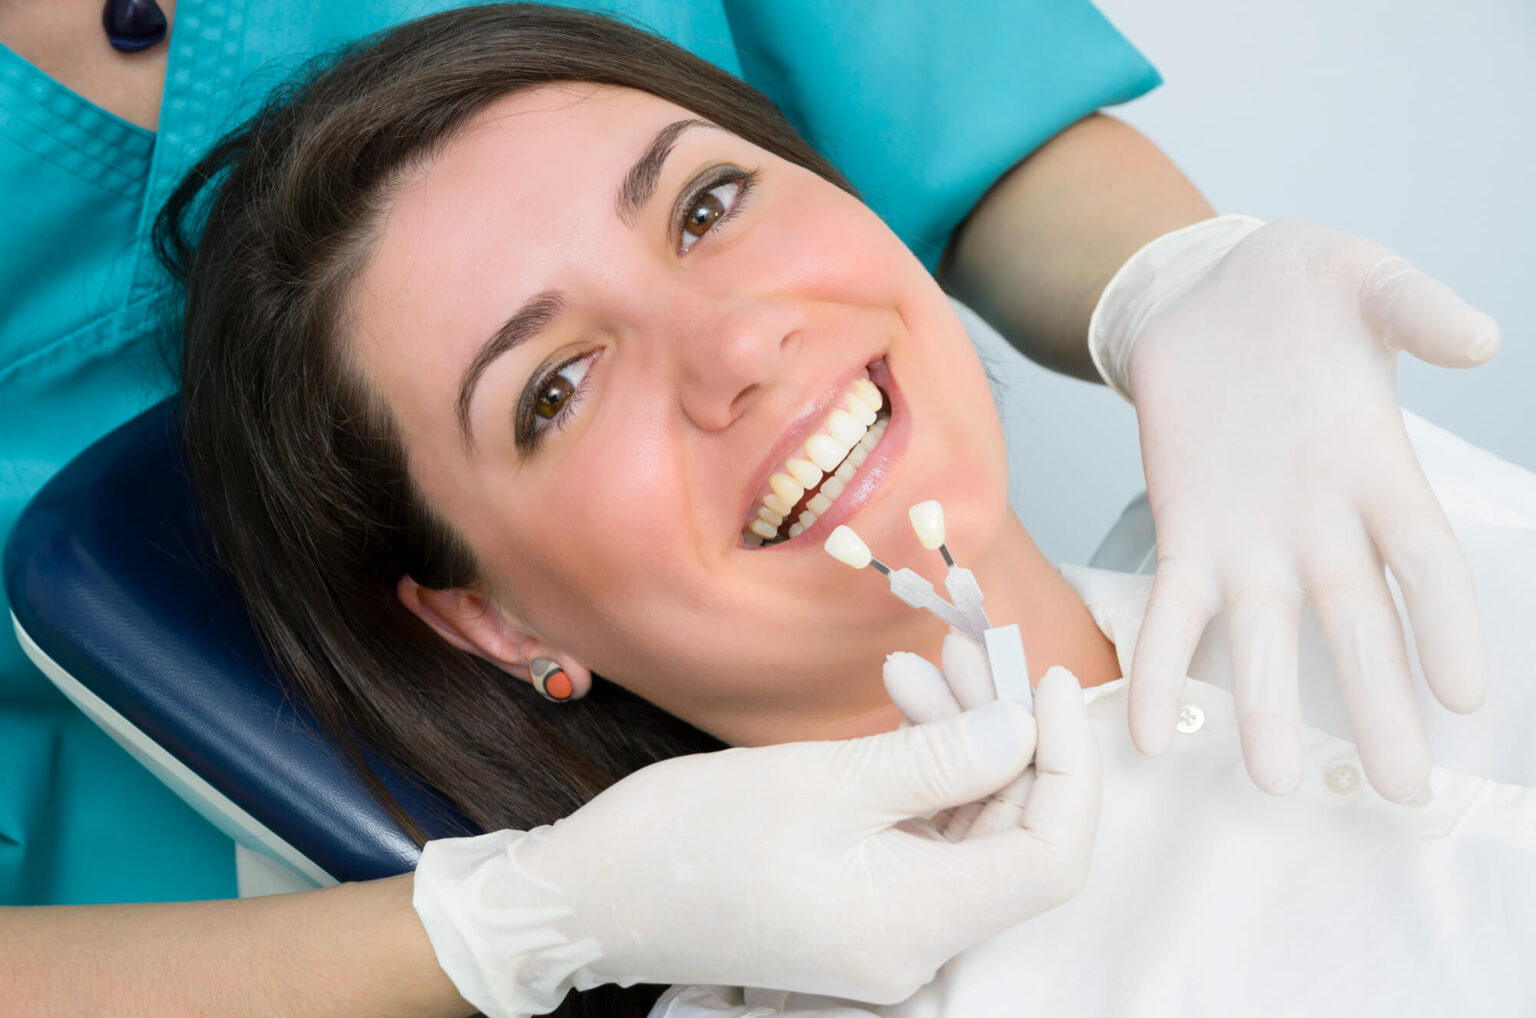 How Do You Know If You Are You A Good Candidate For Dental Implants?